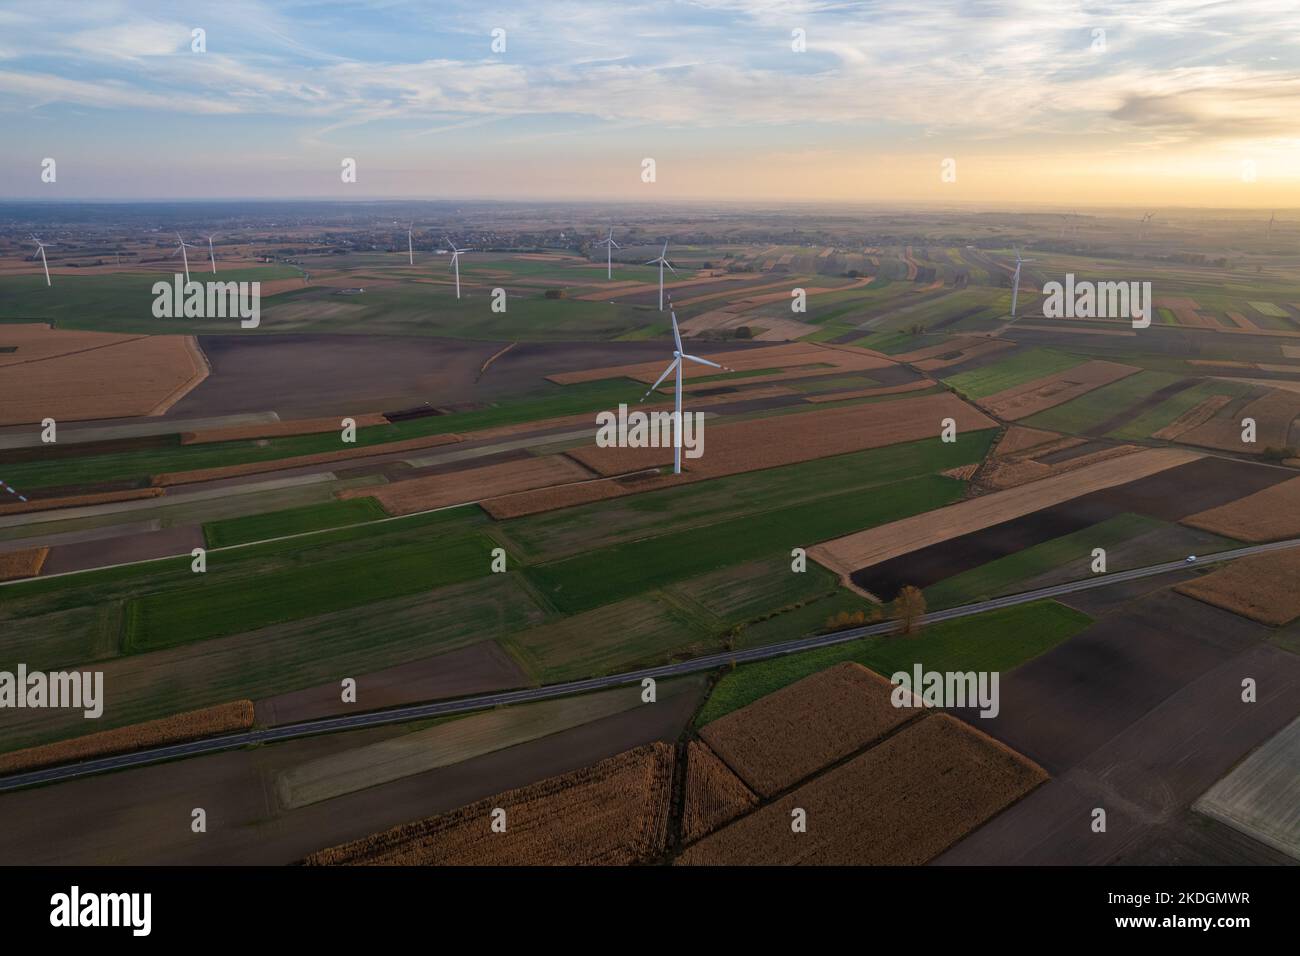 Aerial view of windmill on wind farm Stock Photo